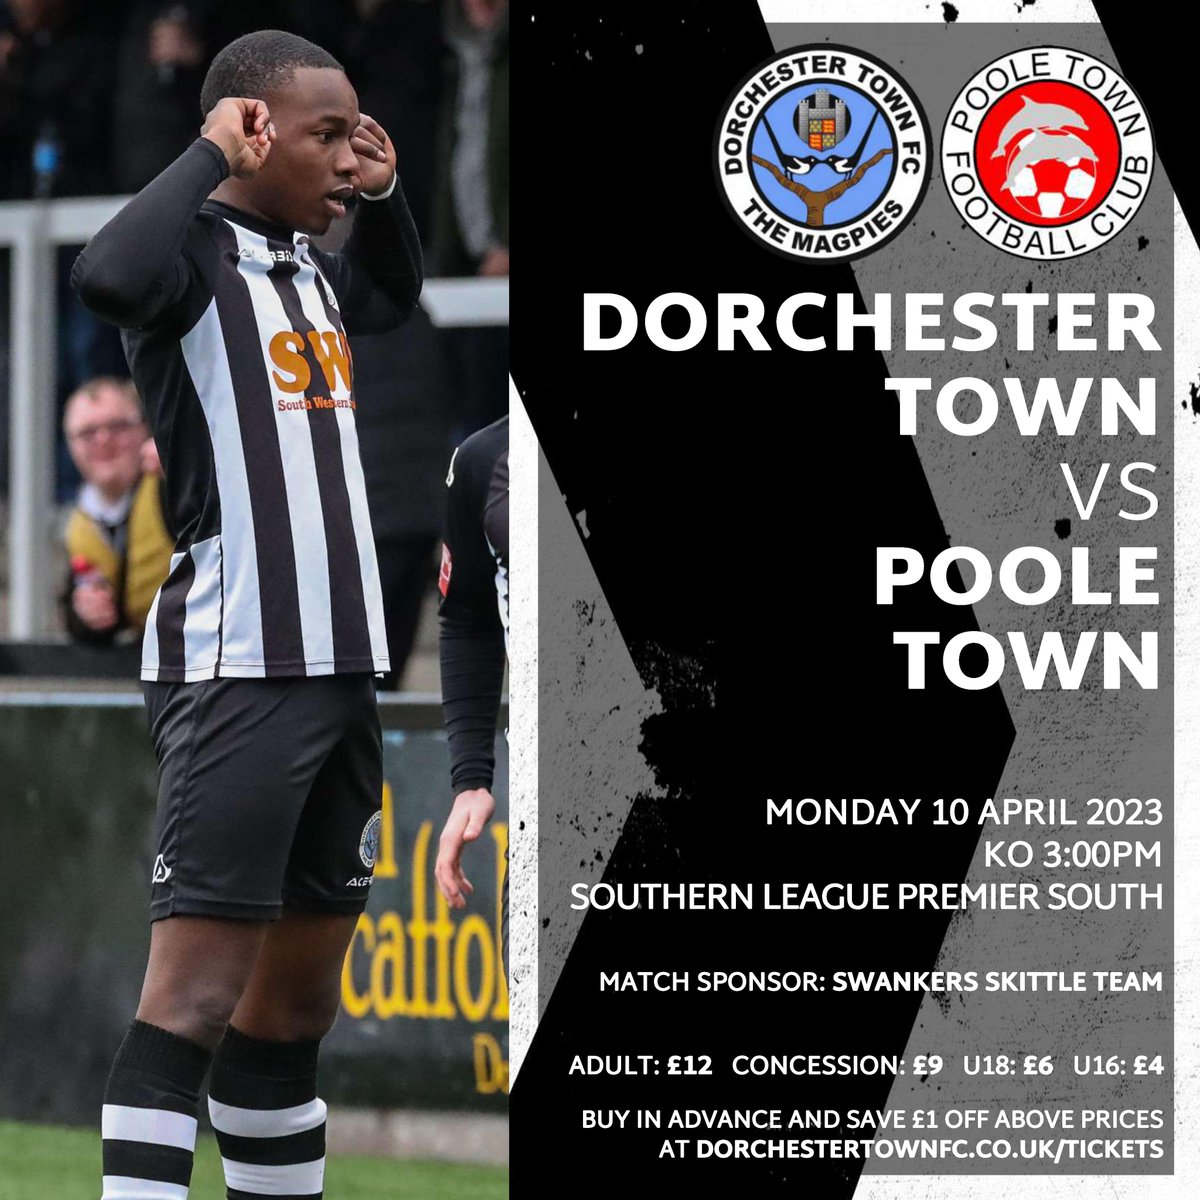 🔜 | 𝙐𝙋 𝙉𝙀𝙓𝙏

It's a double header this Easter Bank Holiday weekend 🙌

🆚 @cheshamutdfc (A) 
📅 Fri 7 Apr

🆚 @PooleTownFC (H) 
📅 Mon 10 Apr

#WeAreDorch ⚫️⚪️